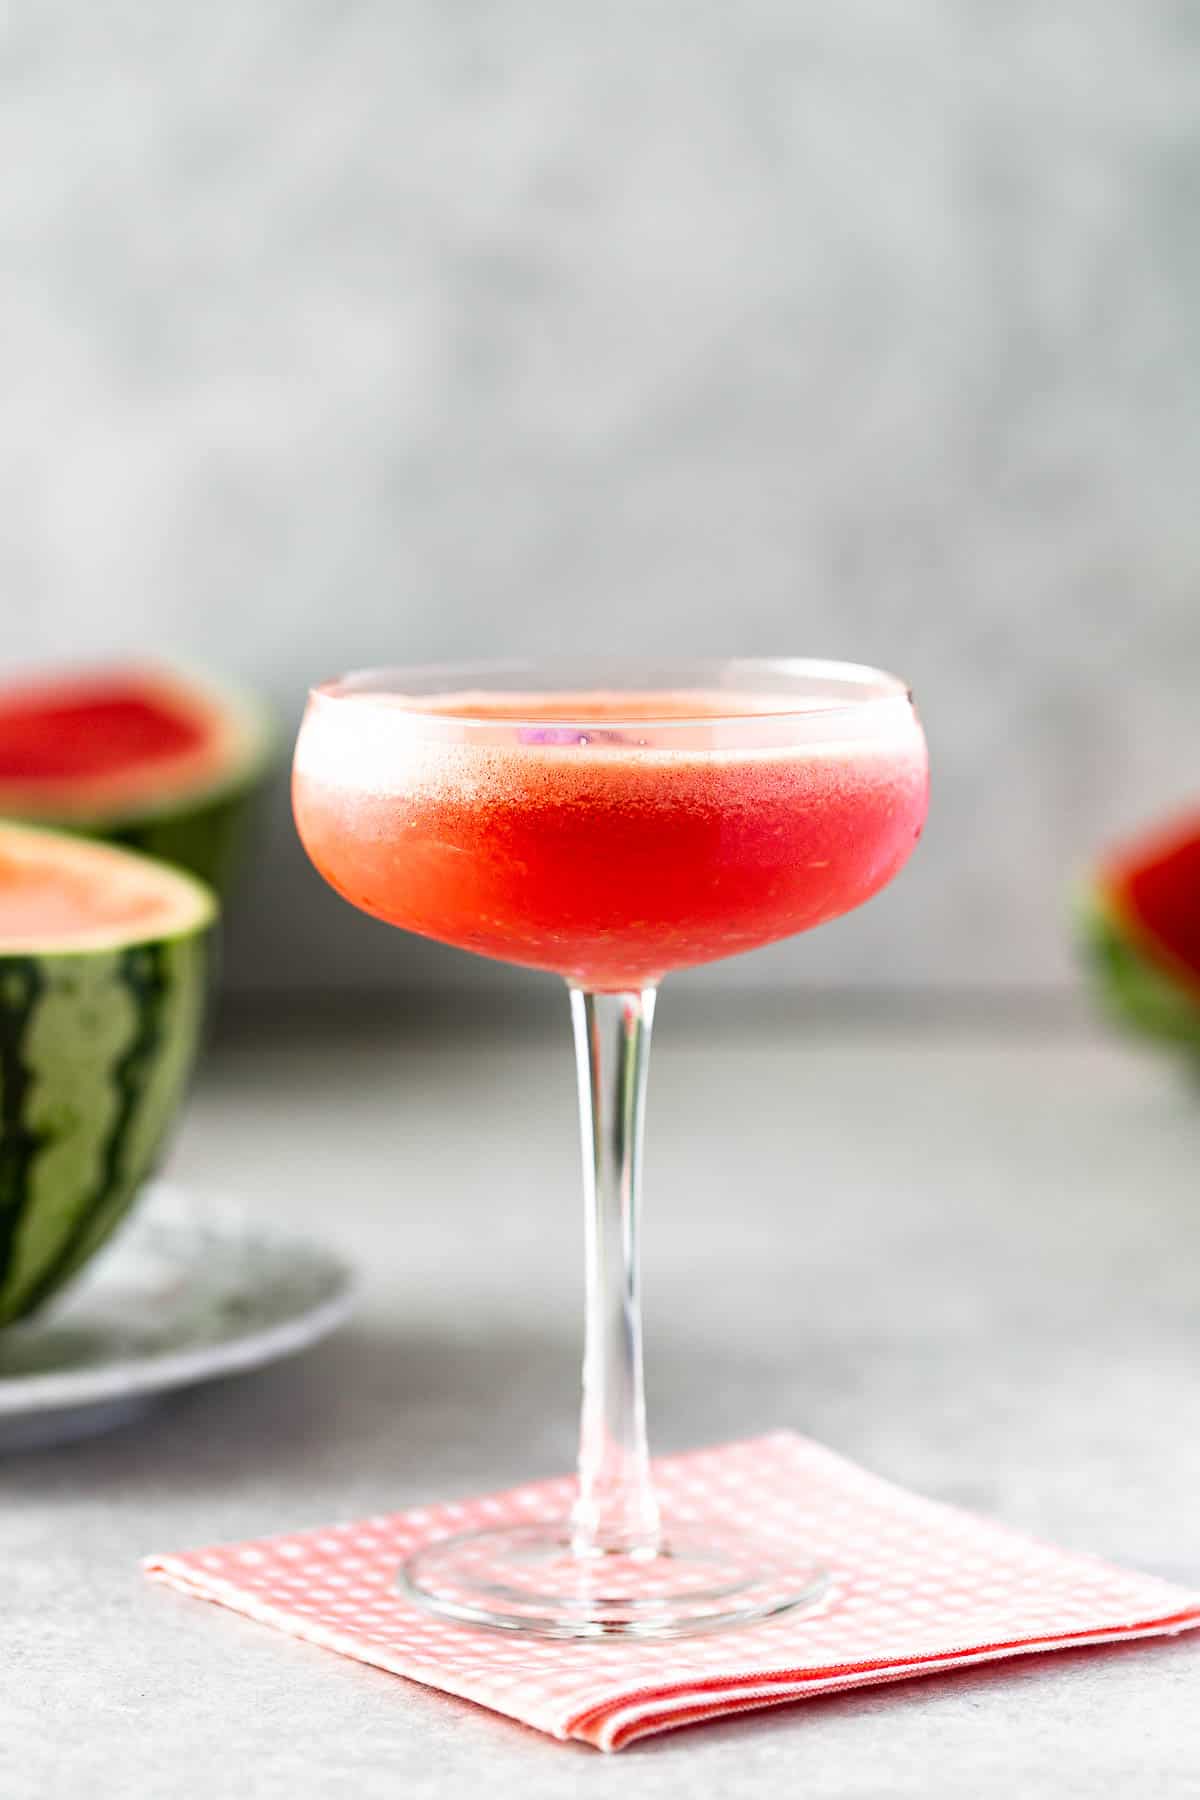 A red cocktail on a pink napkin in front of a halved watermelon.